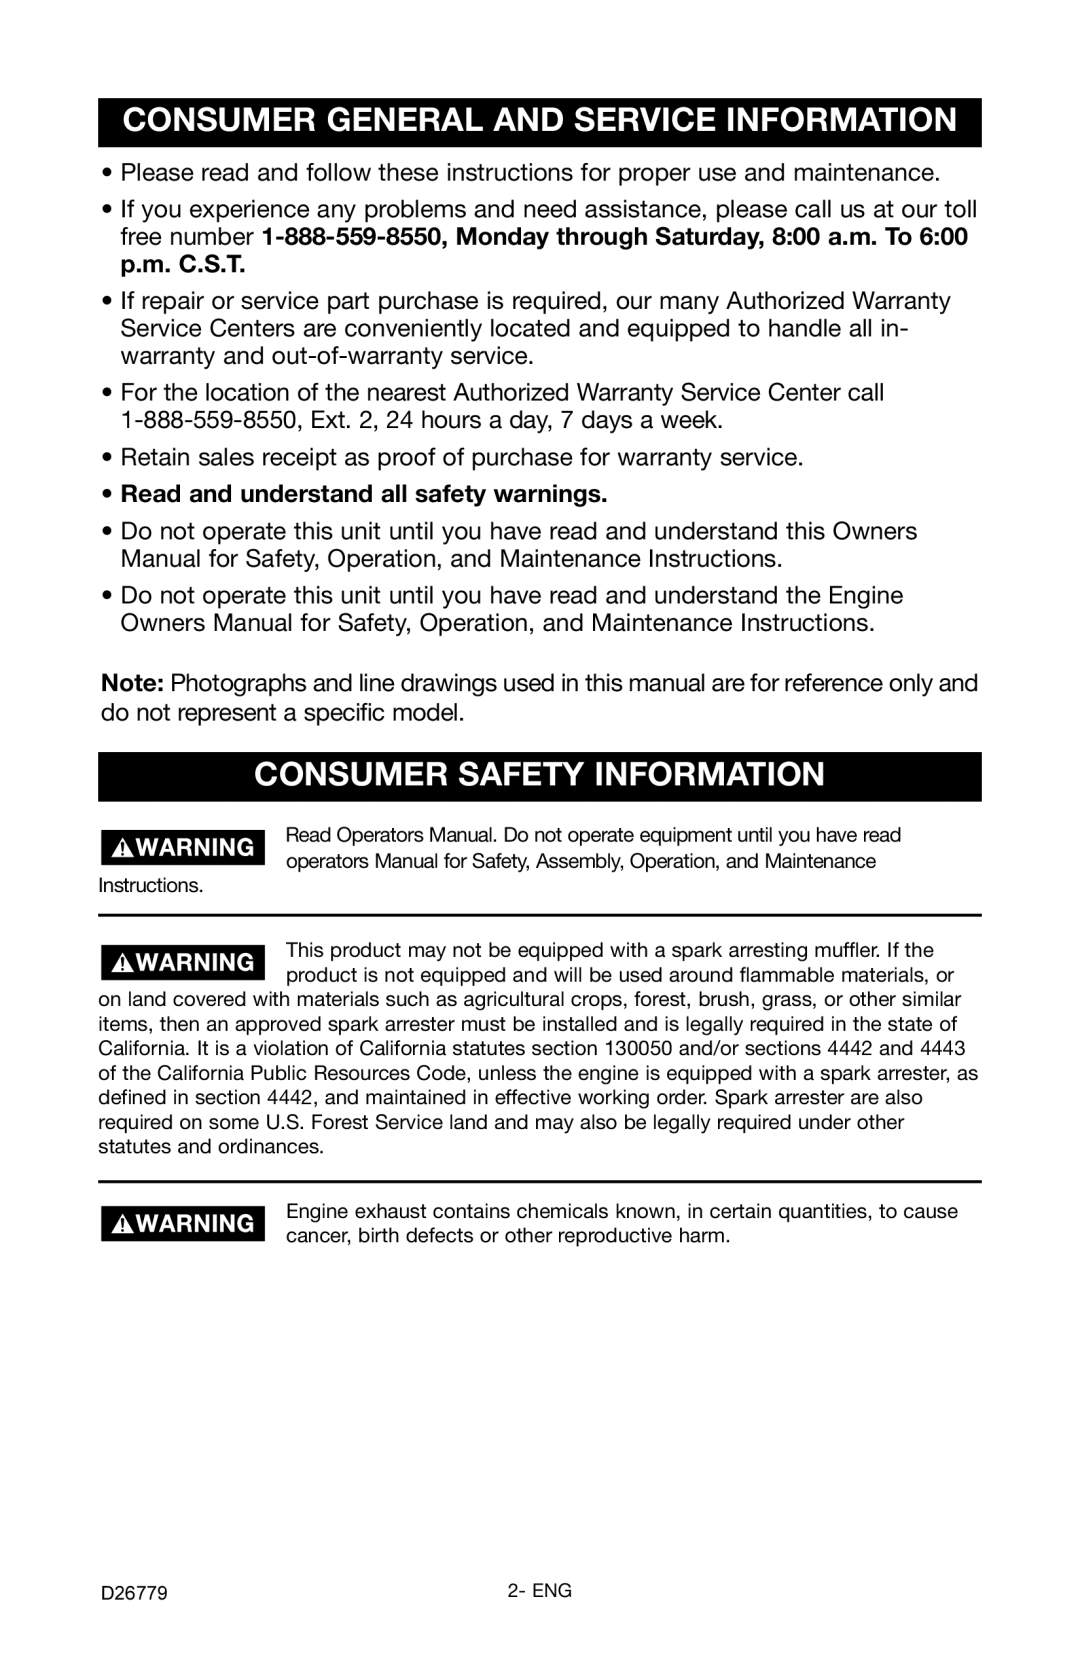 Porter-Cable D26779-028-0 instruction manual Consumer General And Service Information, Consumer Safety Information 